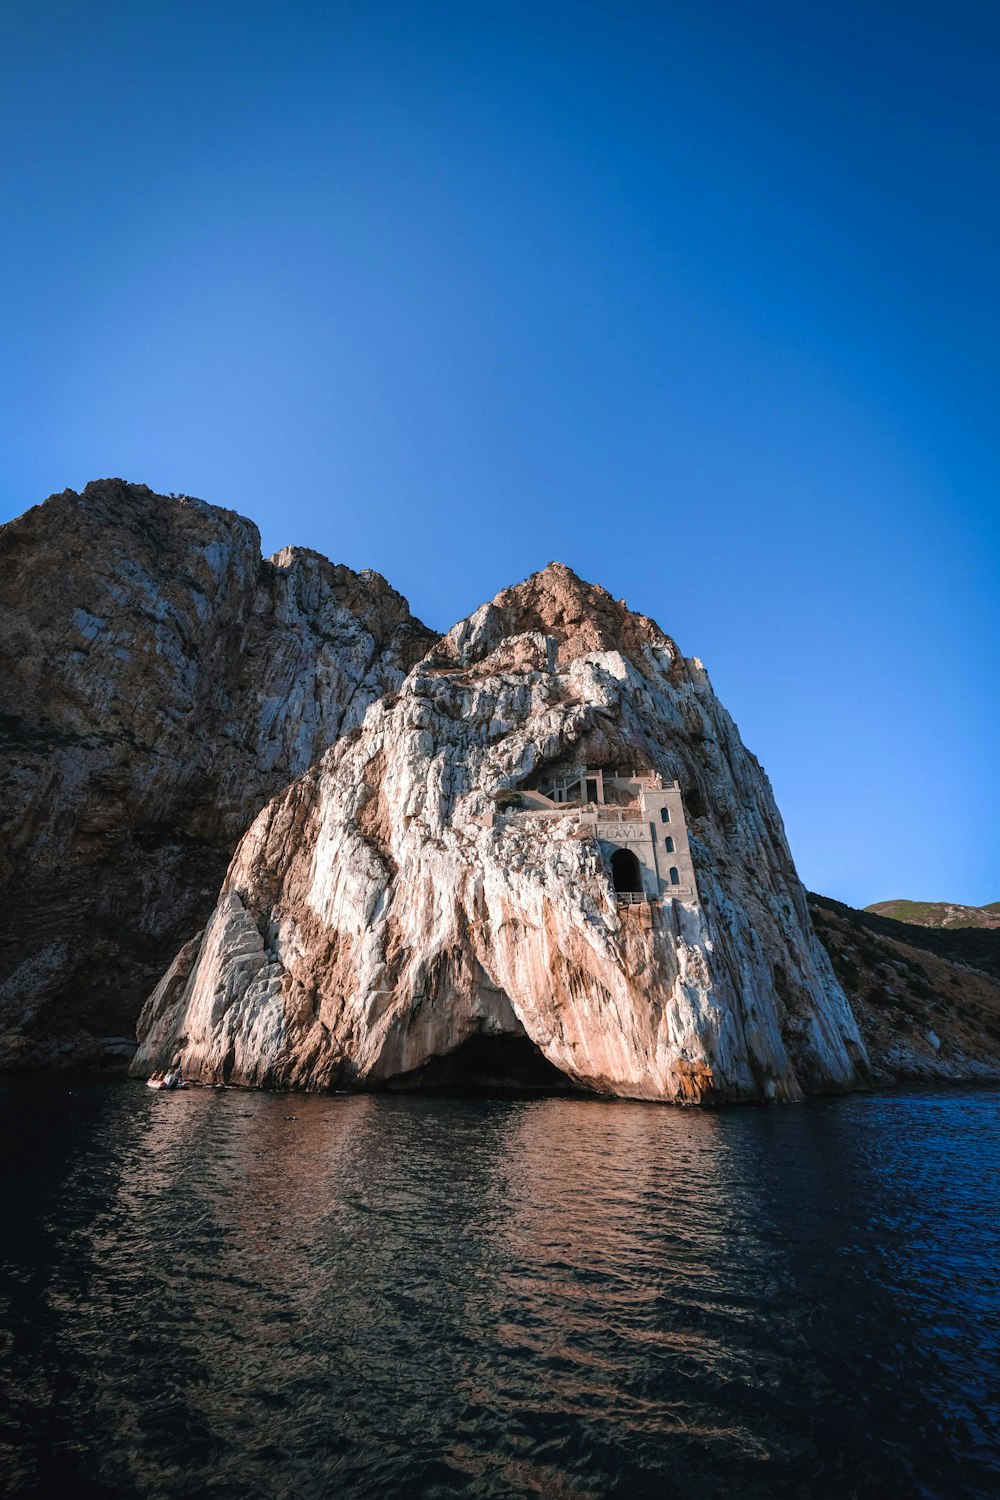 brown rock formation on body of water under blue sky during daytime